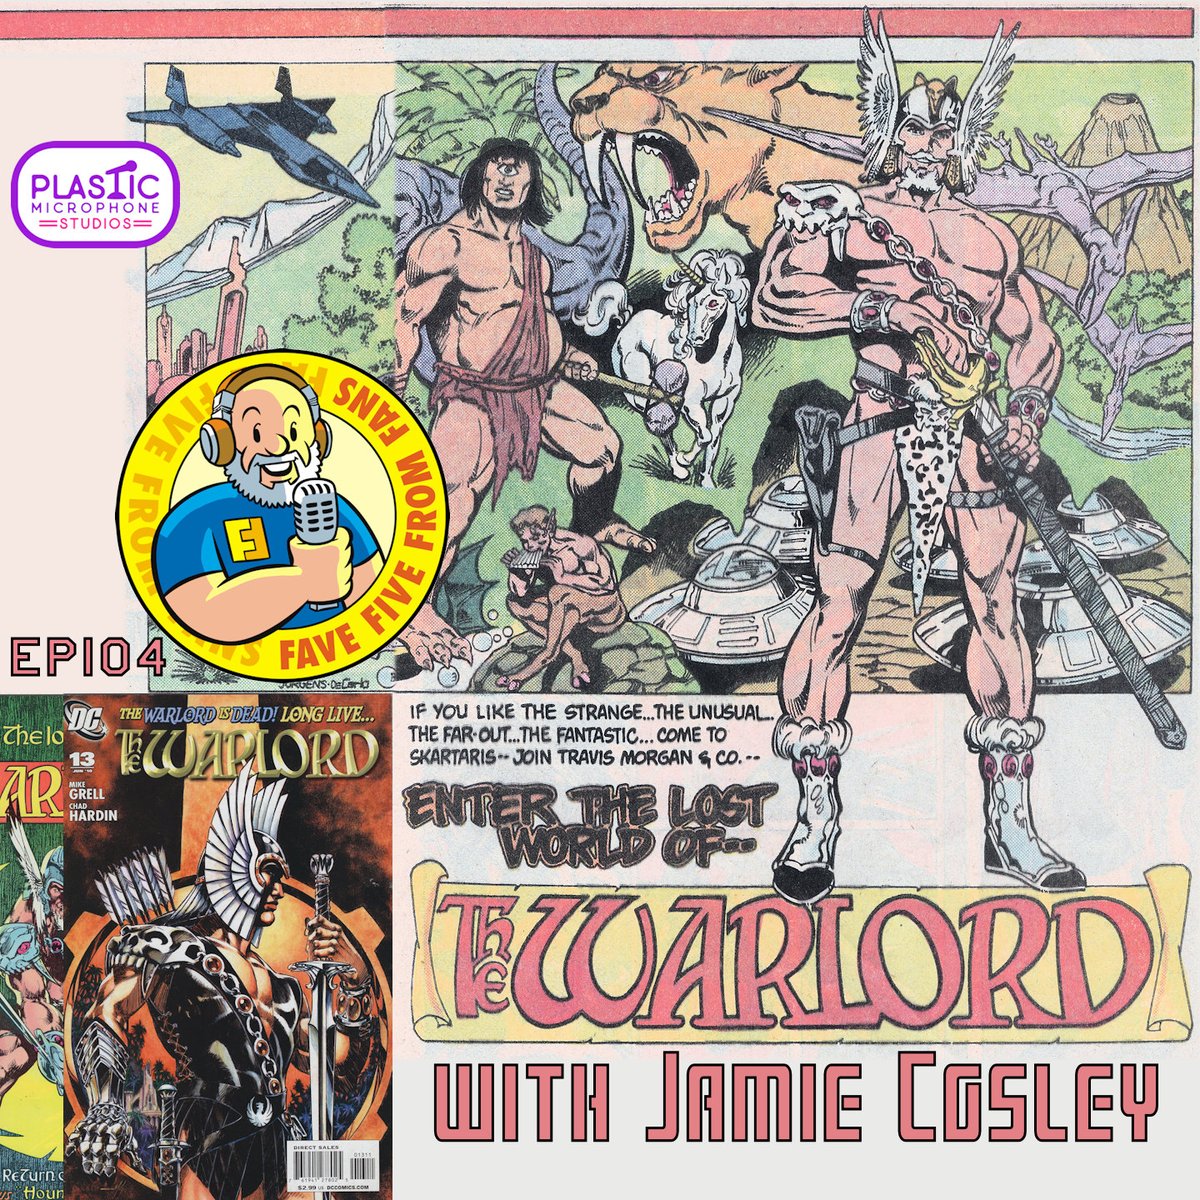 Check out Ep104 Fave Five Warlord Comic Book Covers with @JamieCosley. We discuss @GrellOfficial, @thedanjurgens, Mark Texeira, and MORE! And this one has VIDEO! bit.ly/ffff104